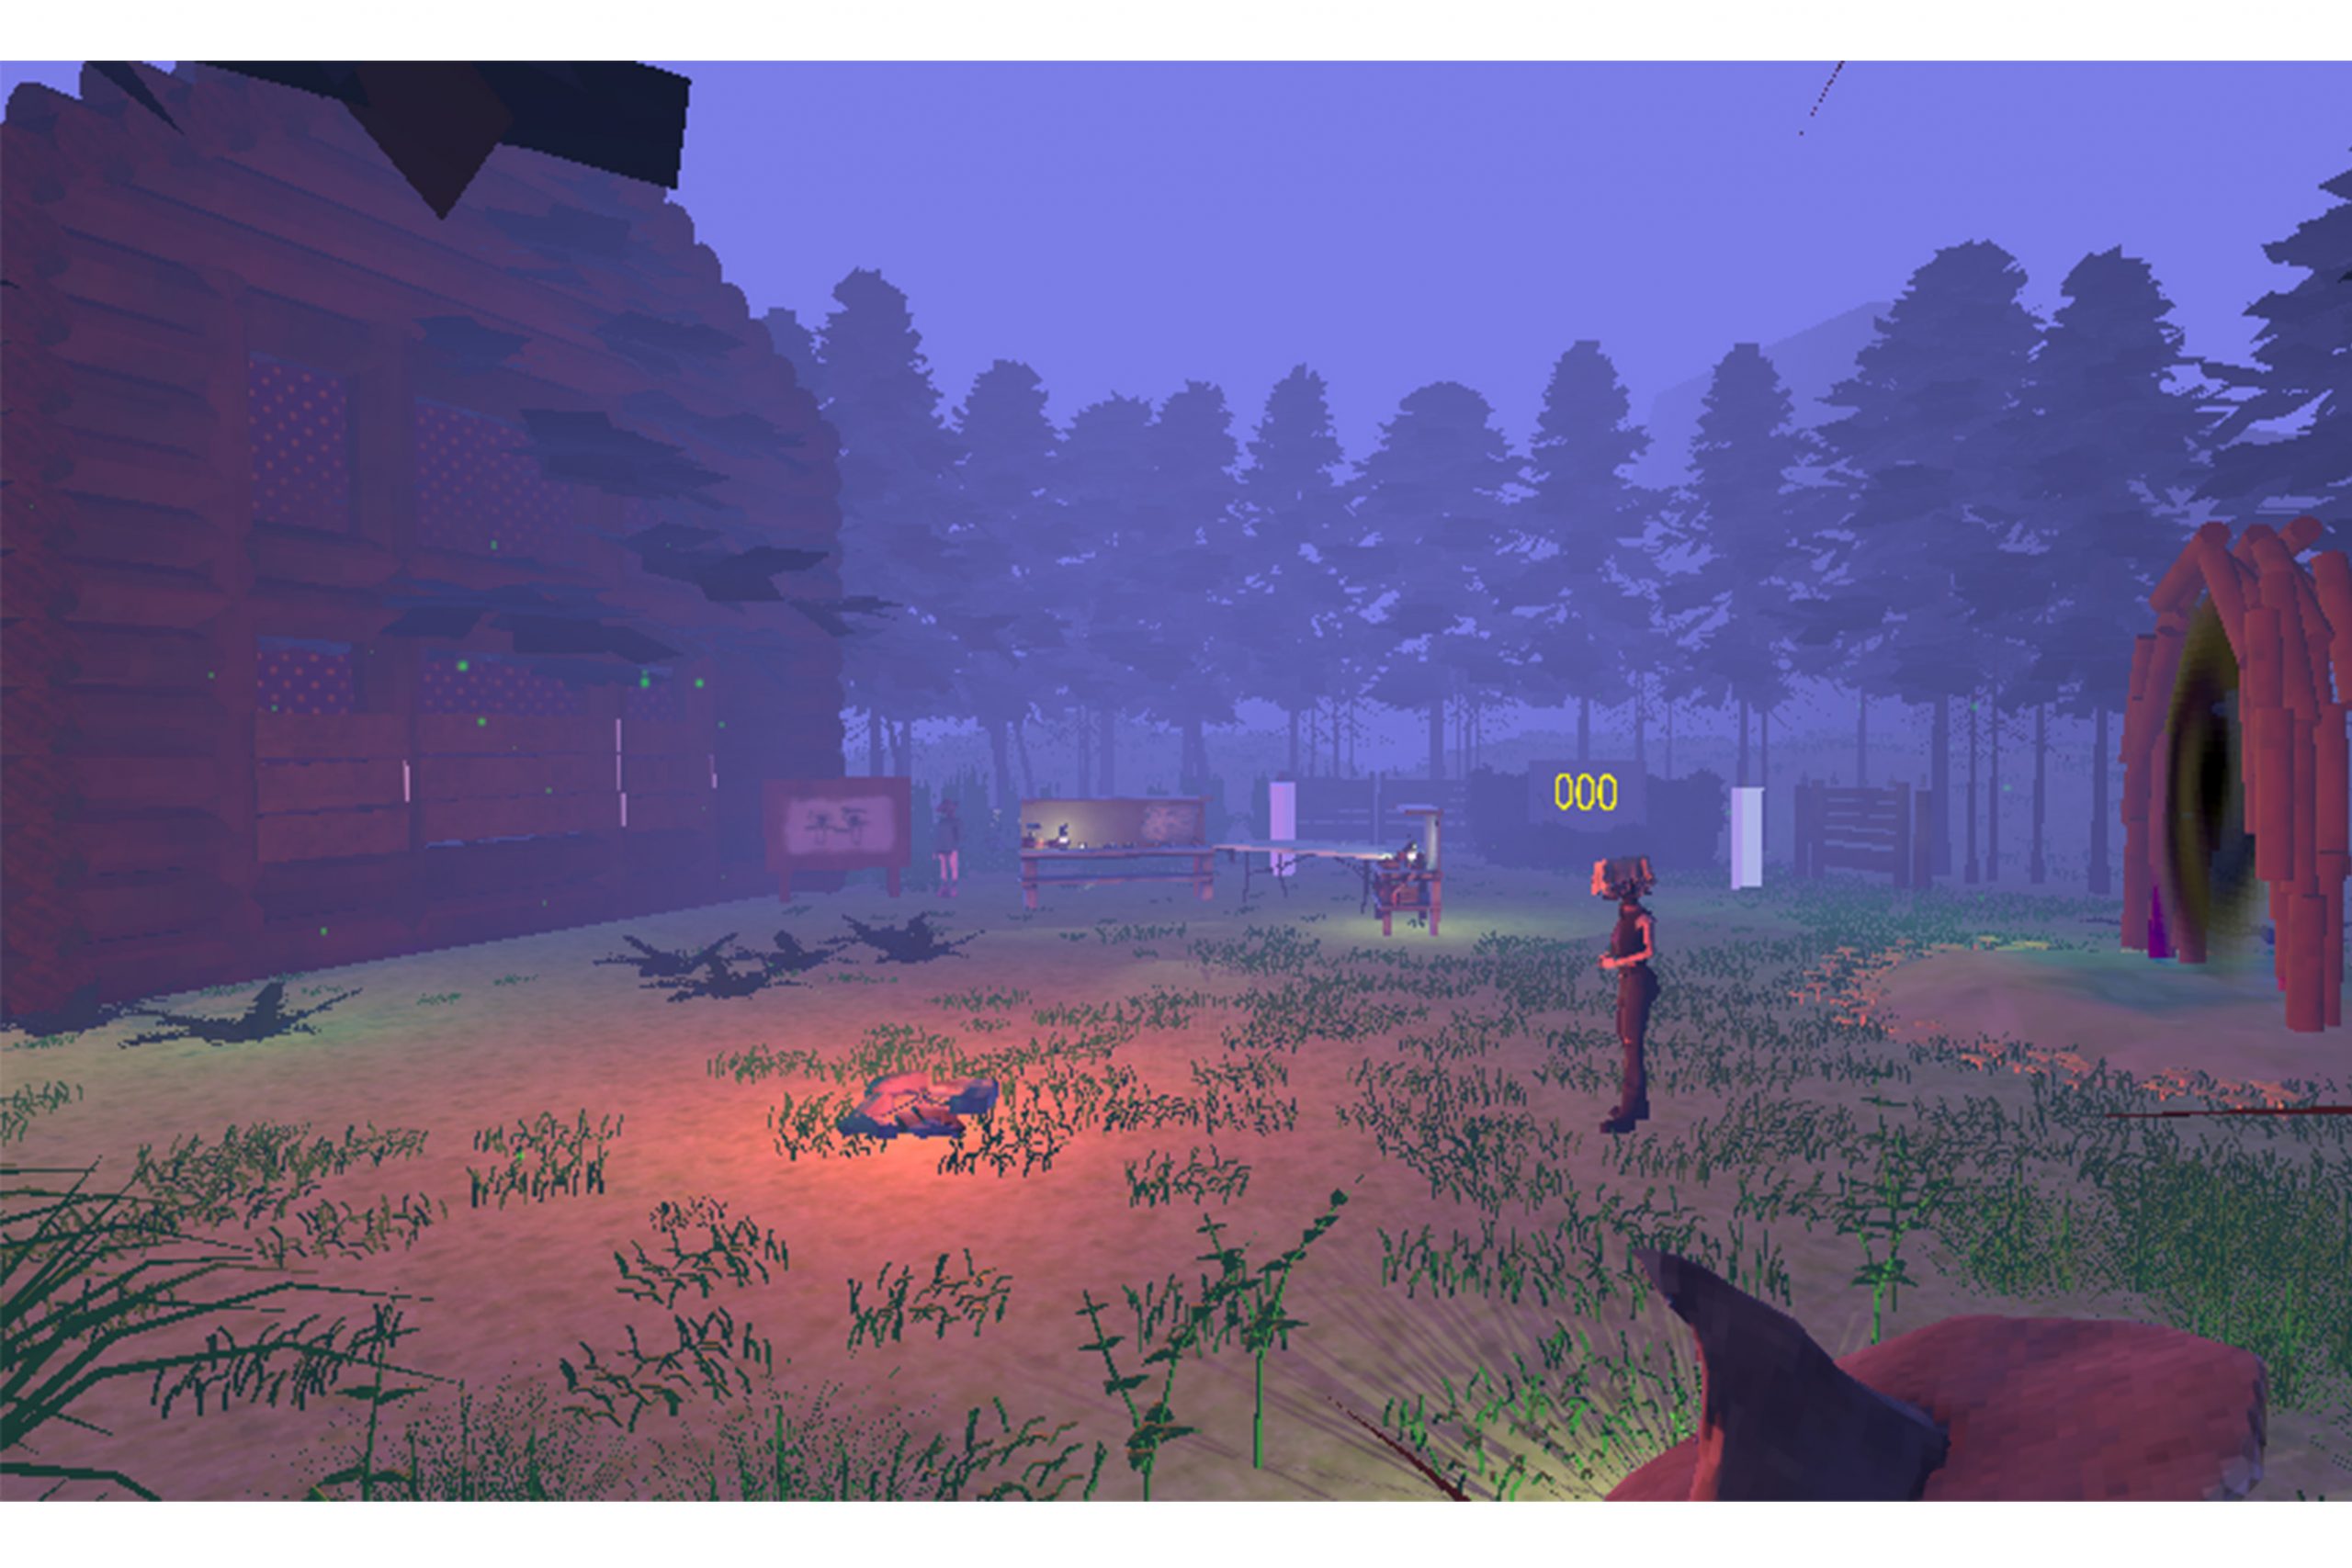 A screenshot from the game Into the Perish by Virtual Monke Studios. The image shows an outside area that looks like a campsite of some kind, with a figure stood near a lit area and mist covered trees in the background.